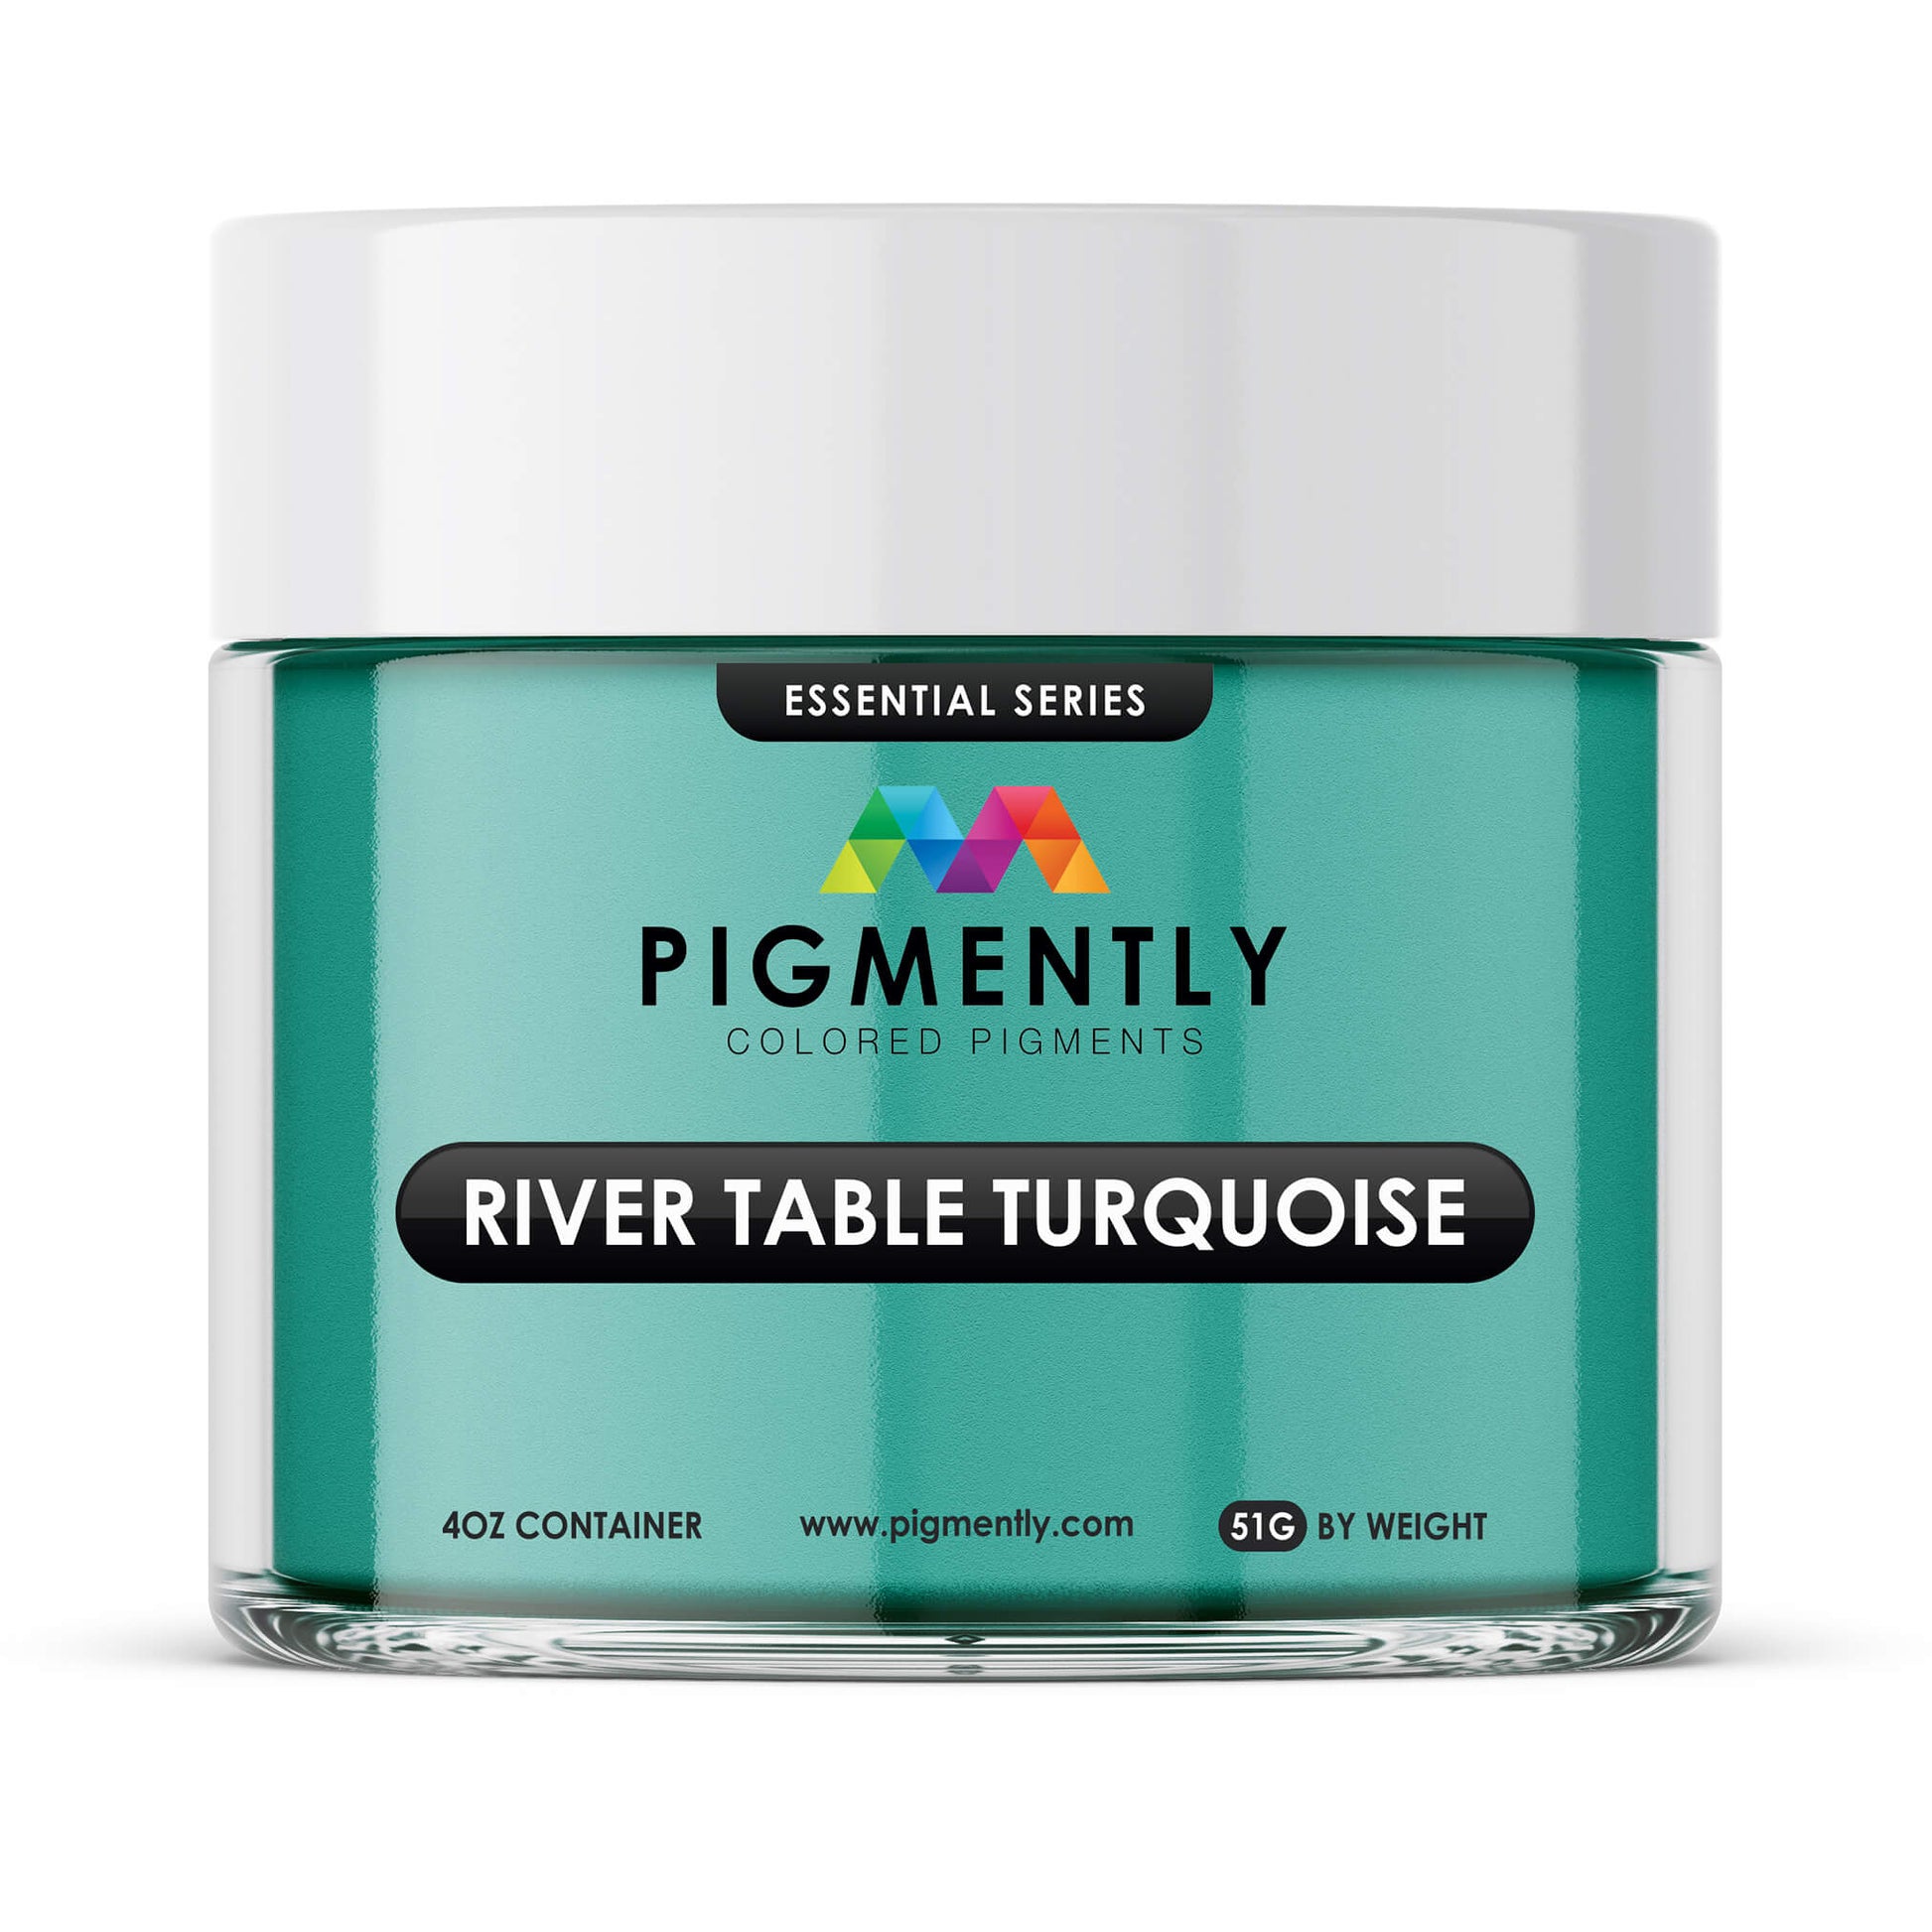 Pigmently River Table Turquoise Mica Powder